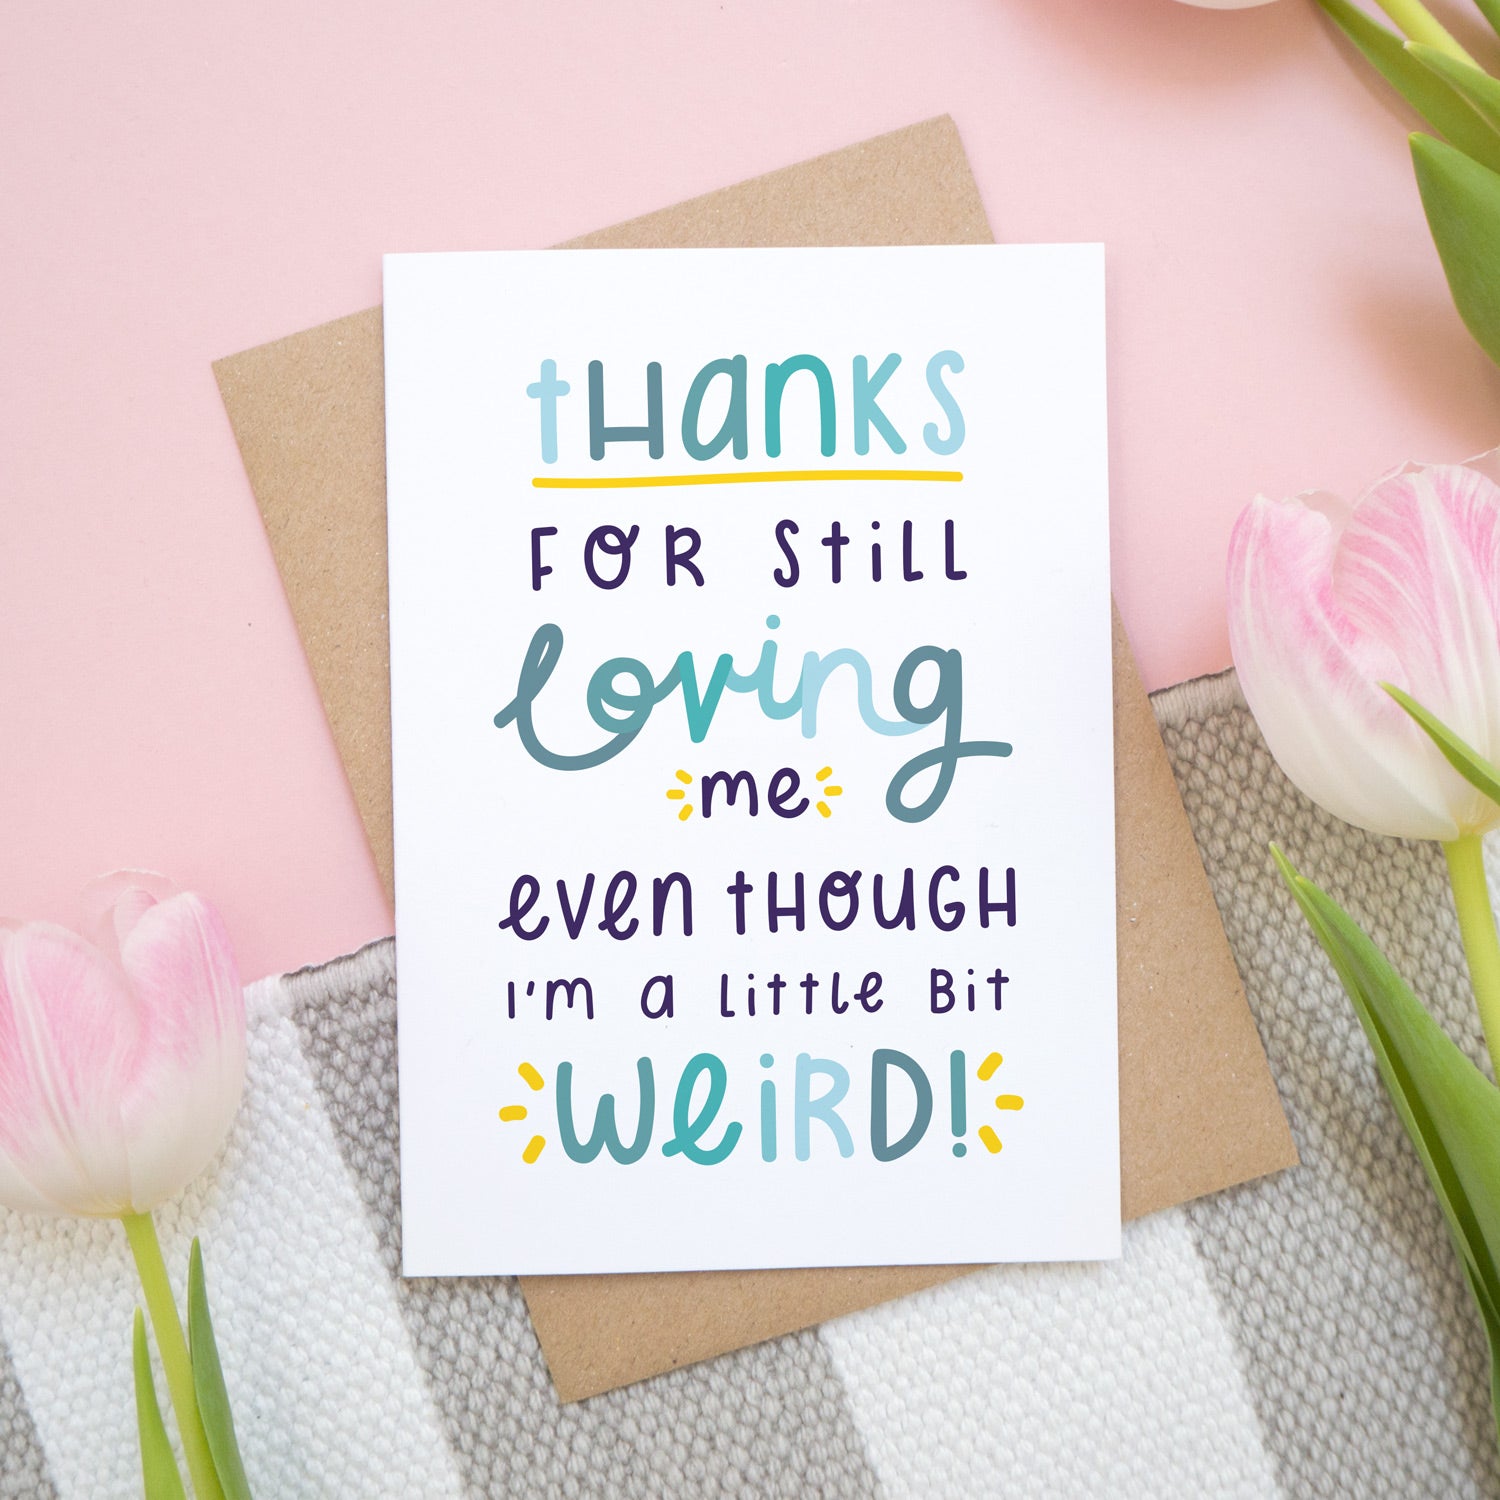 Thanks for still loving me even though I'm a little bit weird card in blue show on a pink background with tulips.